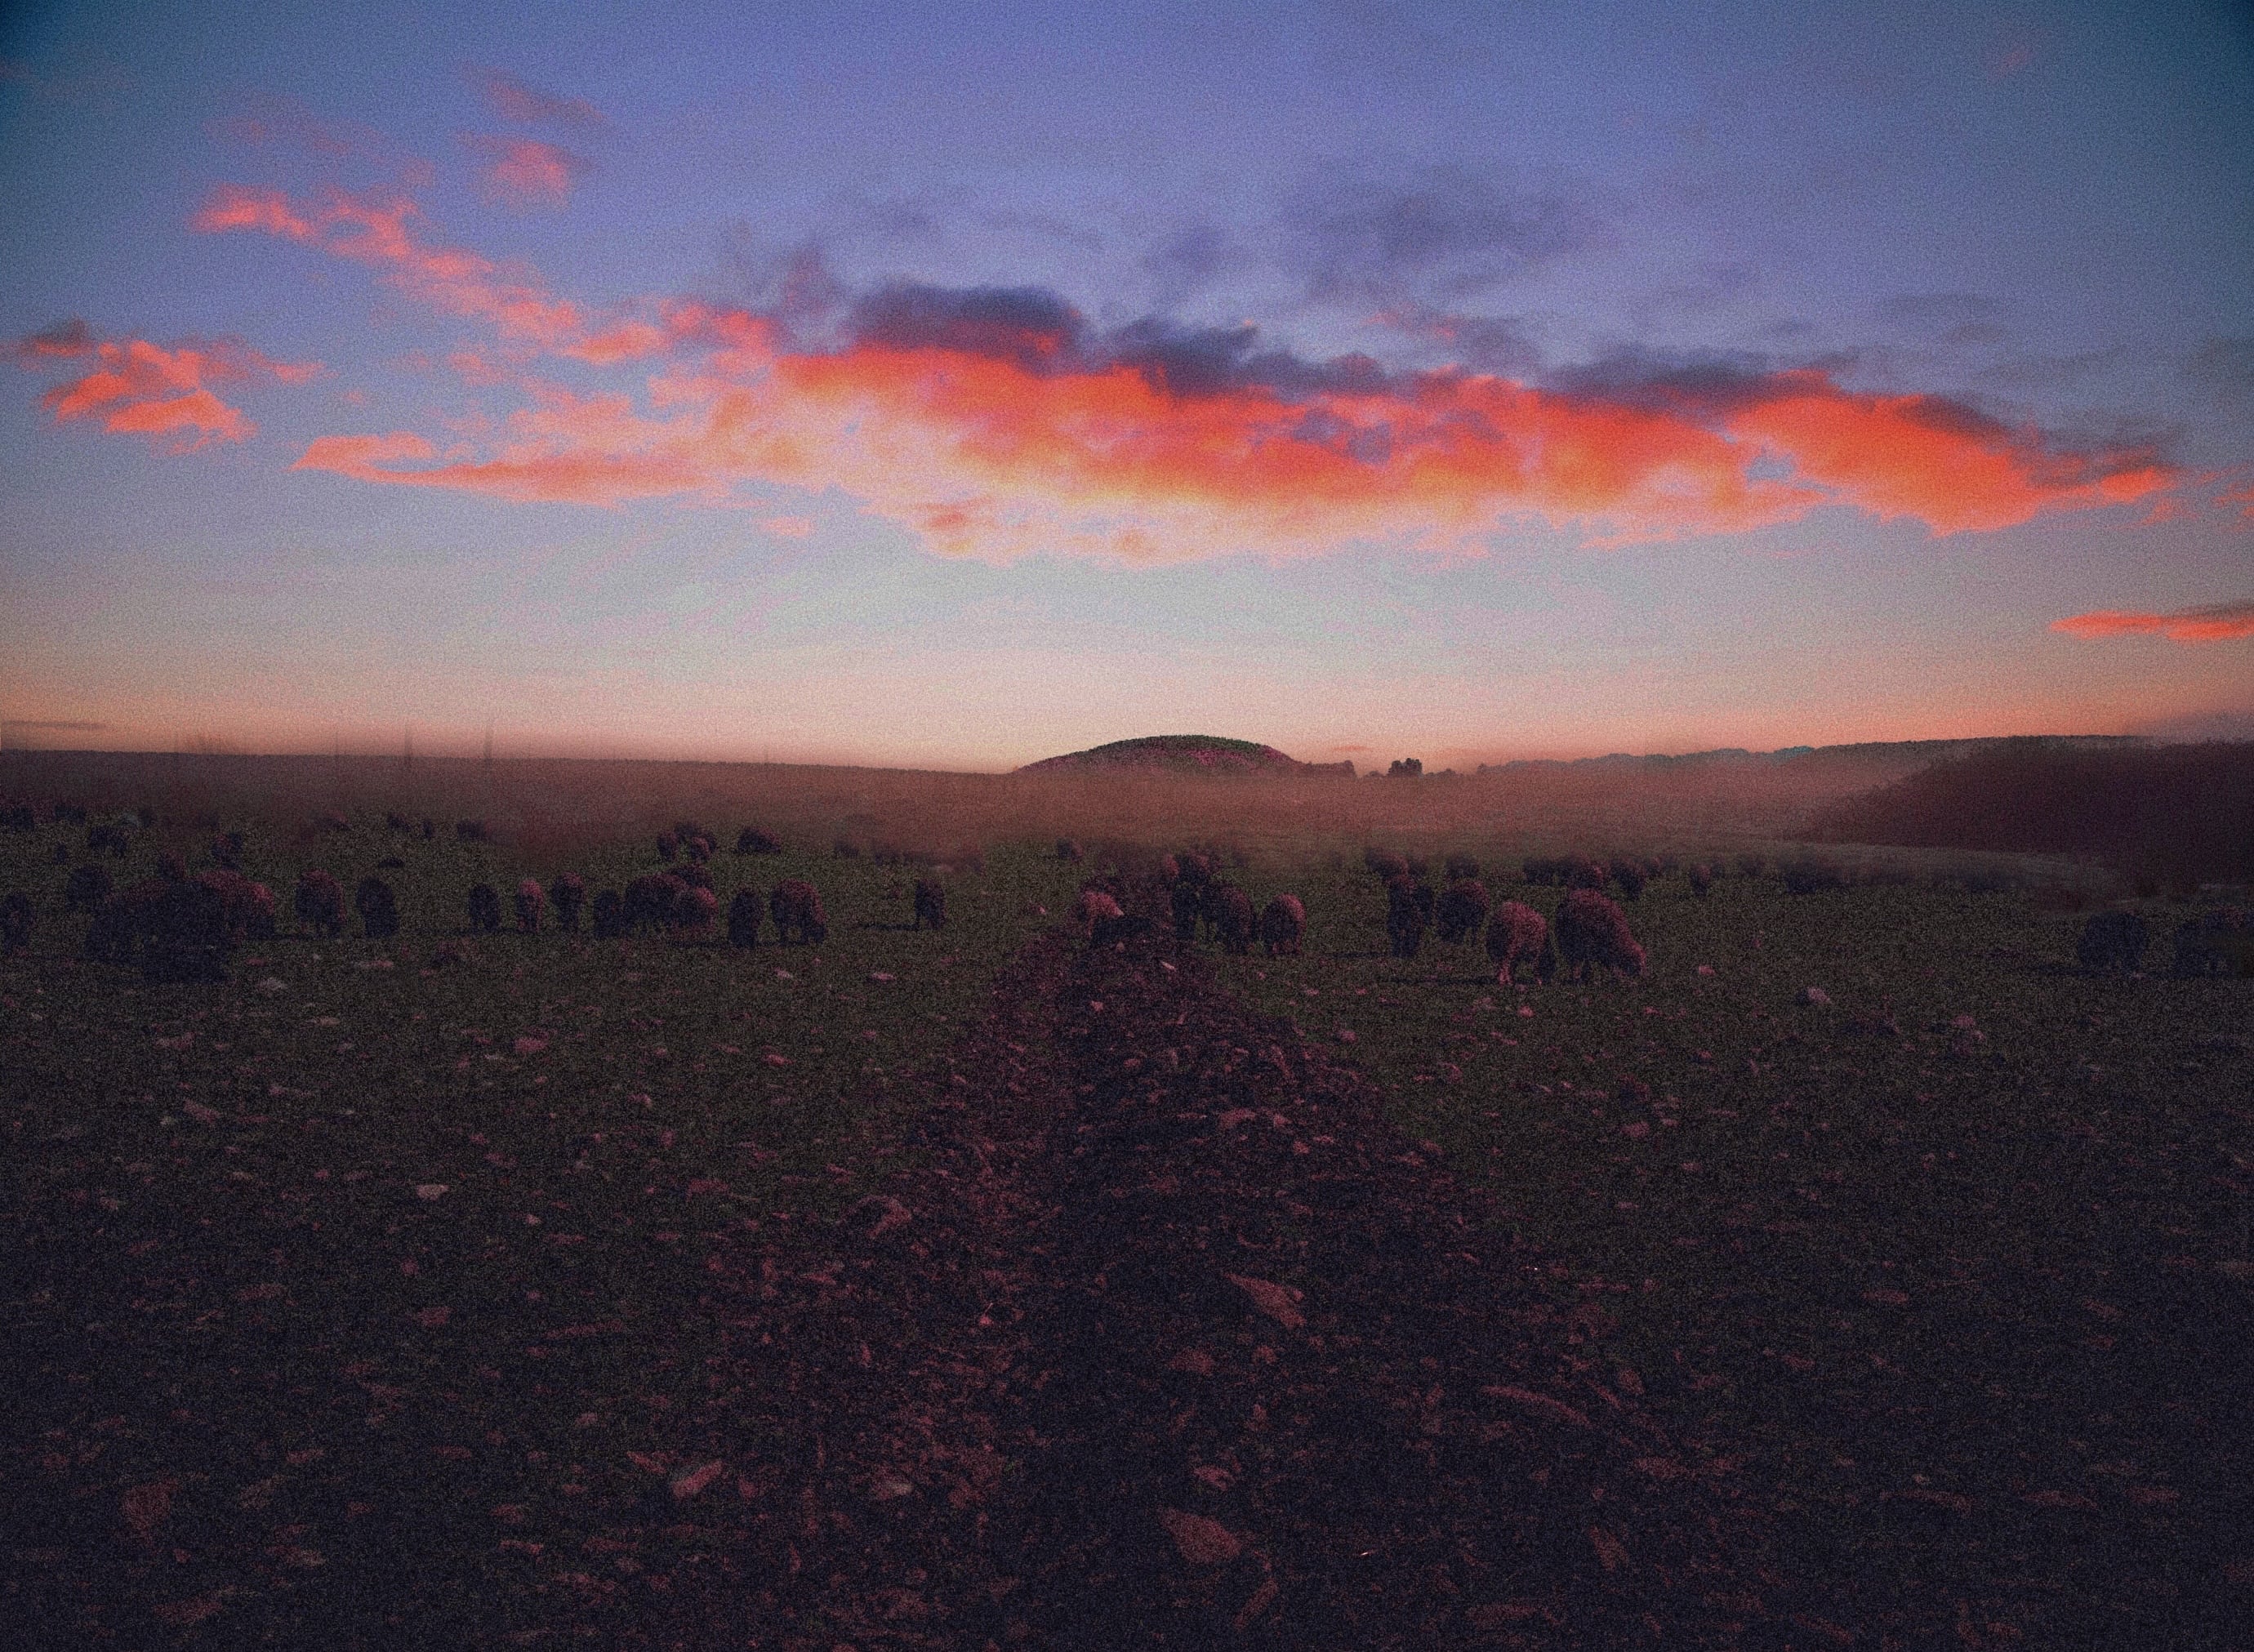 Field of sheep with morning sunrise